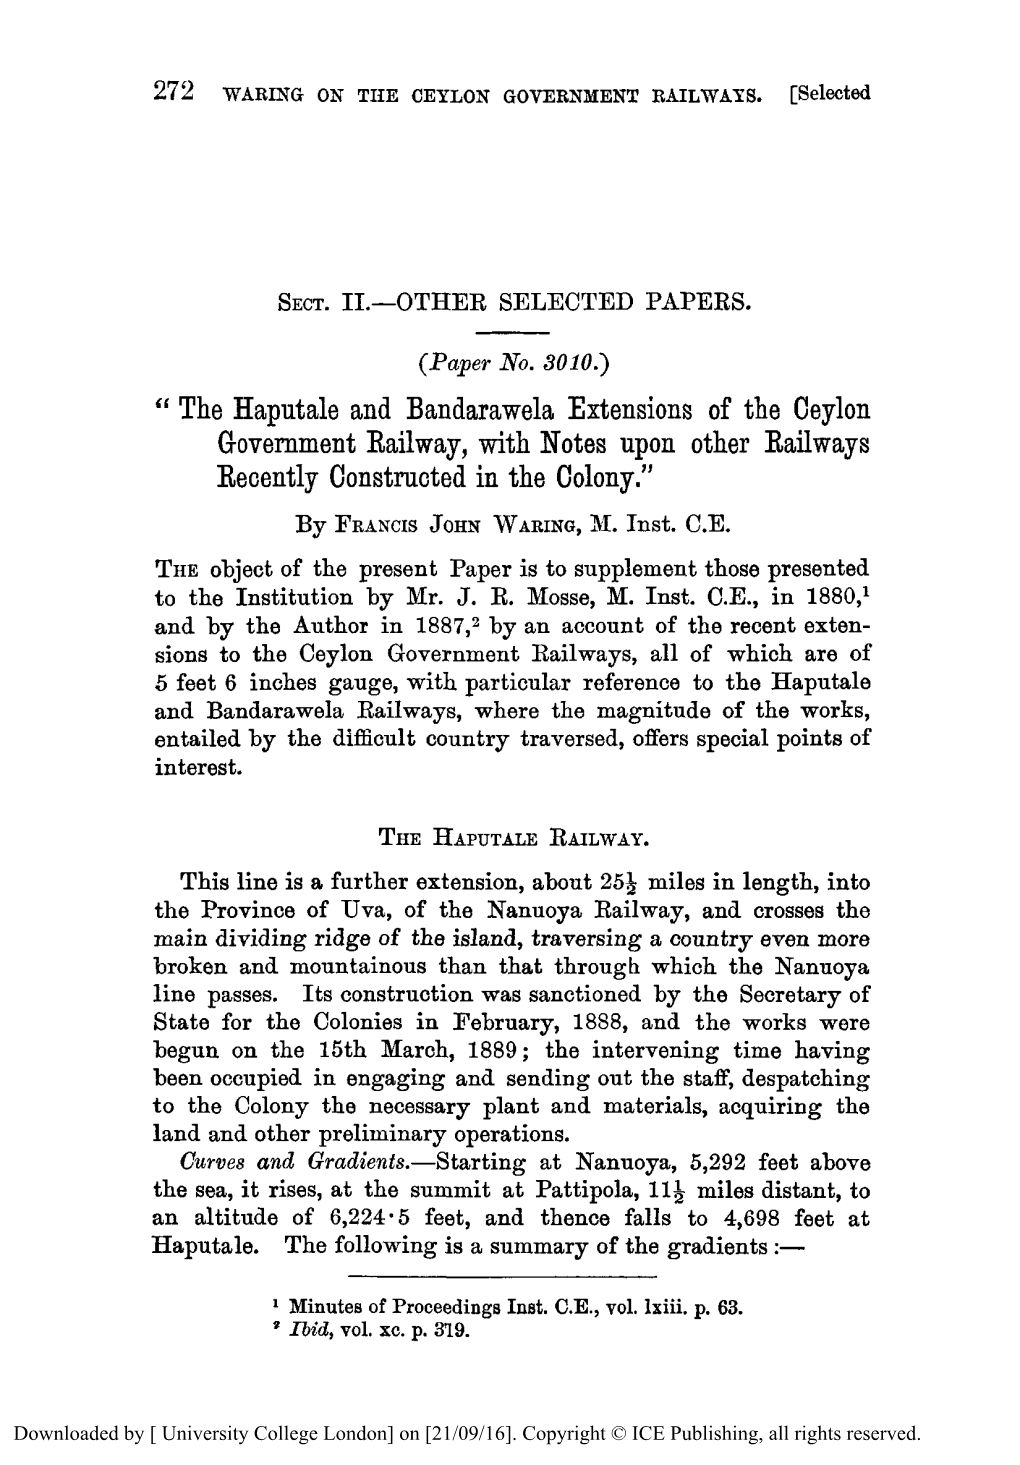 The Haputale and Bandarawela Extensions of the Ceylon Government Railway, with Notes Upon Other Railways Recently Constructed in the Colony.” by FRANCISJOHN WARING, M